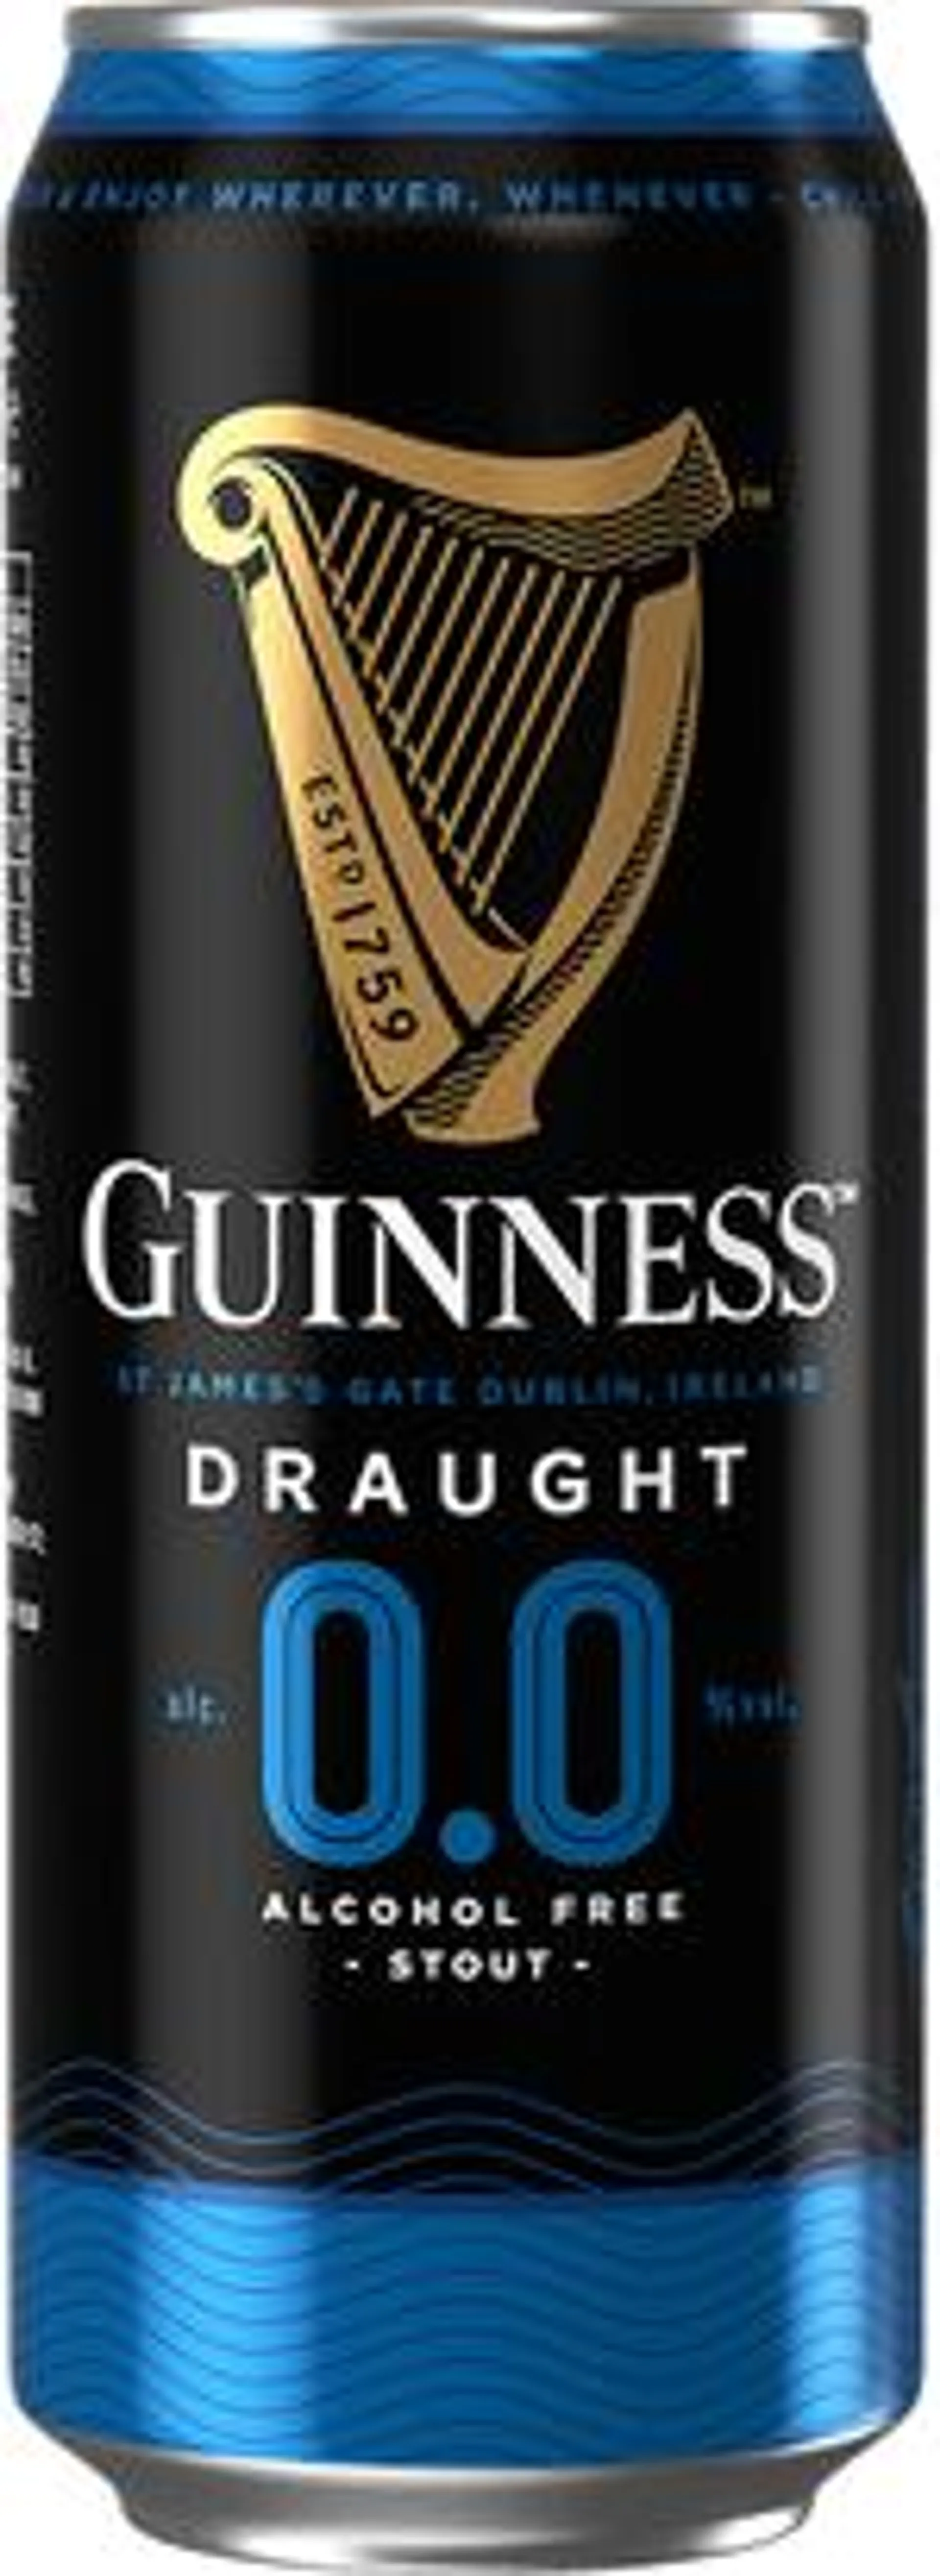 Guinness Draught 0.0 Alcohol Free Stout 24 Pack Non DRS